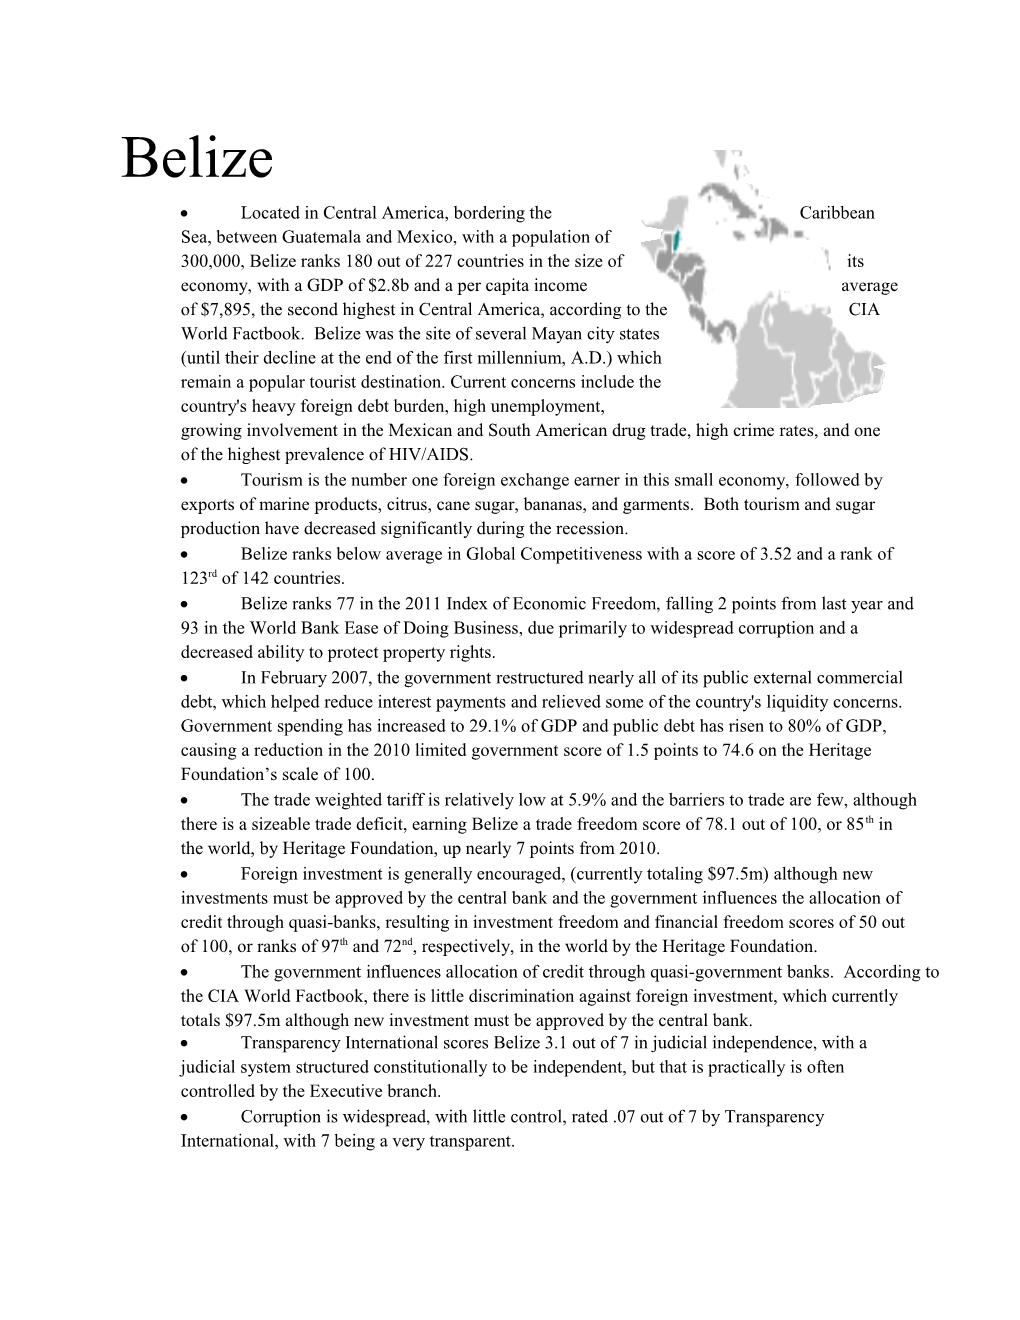 Transparency International Scores Belize 3.1 out of 7 in Judicial Independence, with A